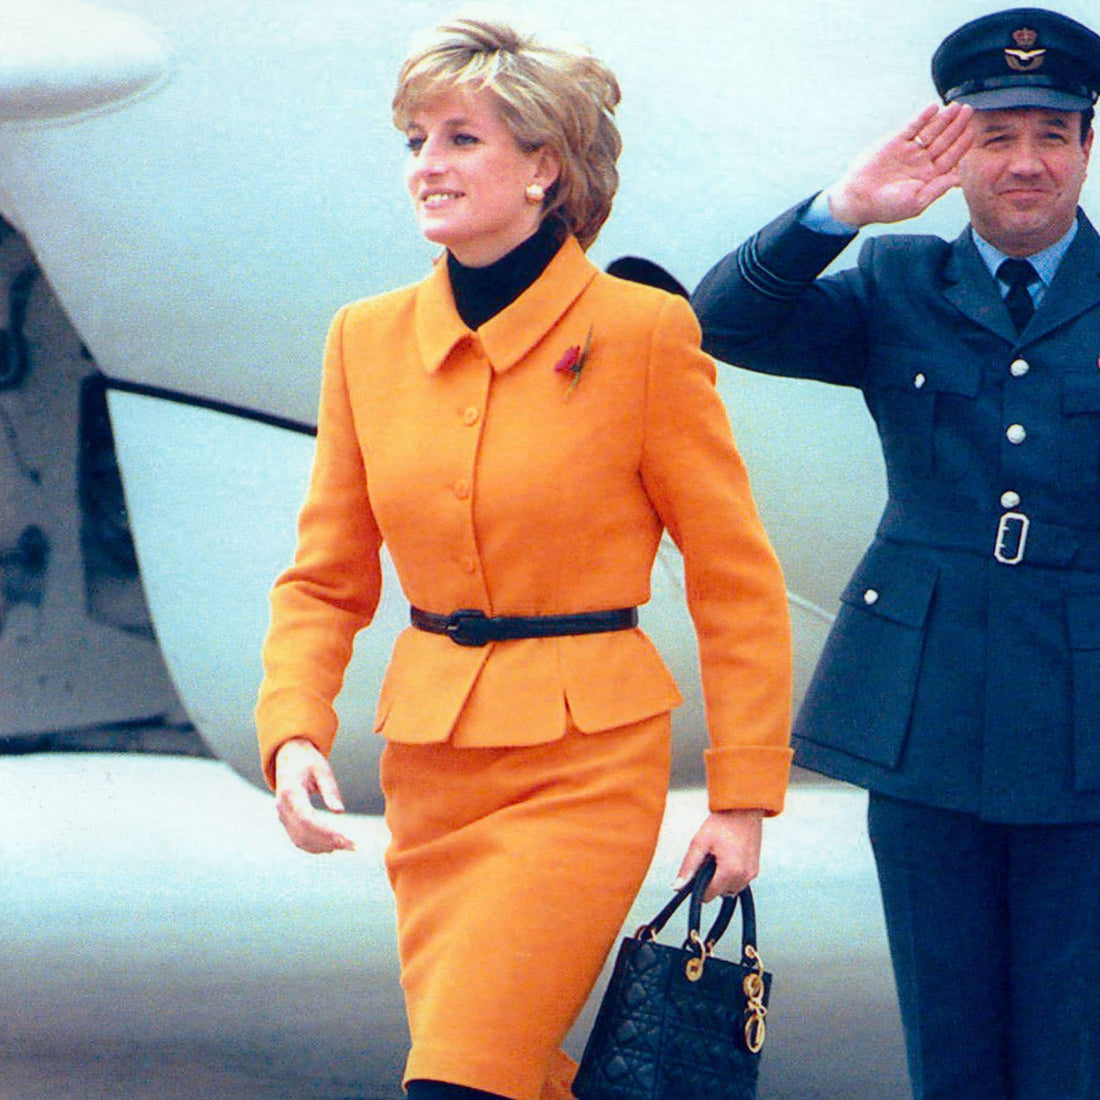 From Princess Diana to today: The history of the iconic Lady Dior bag - Marque De Luxe